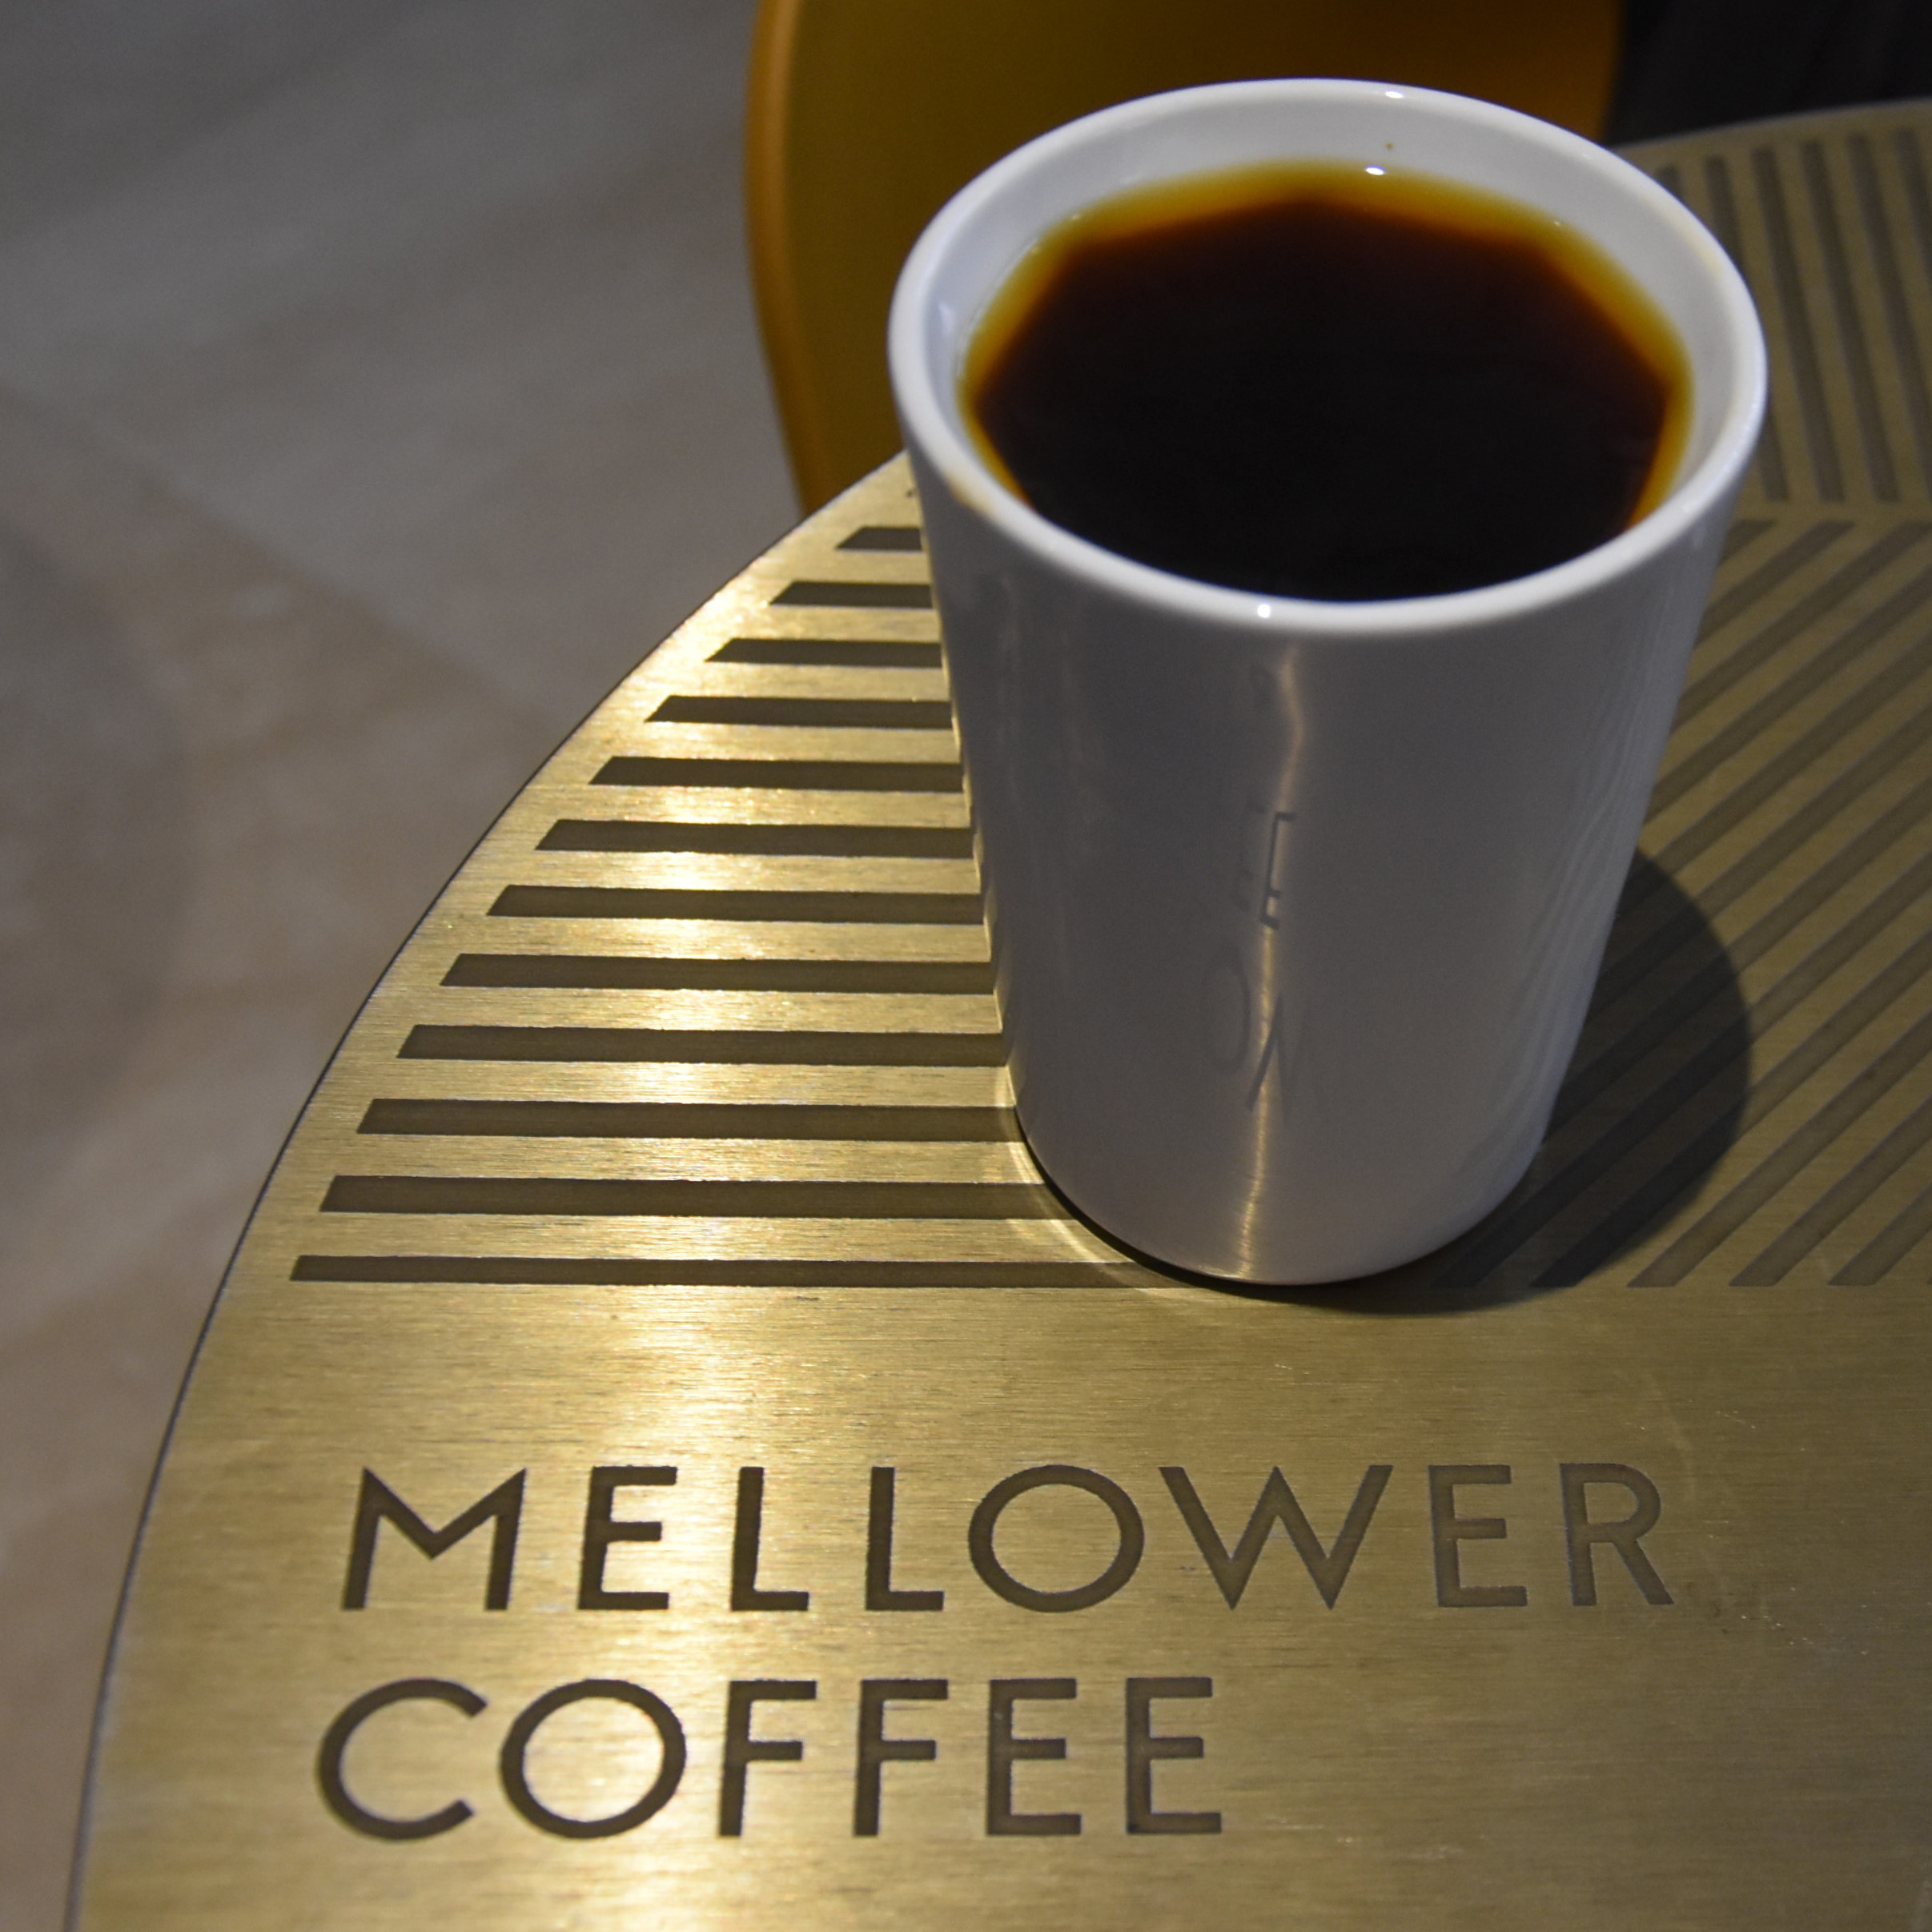 My Enchanting Yunnan pour-over in my Therma Cup at Mellower Coffee in Century Link Tower 1, Shanghai.